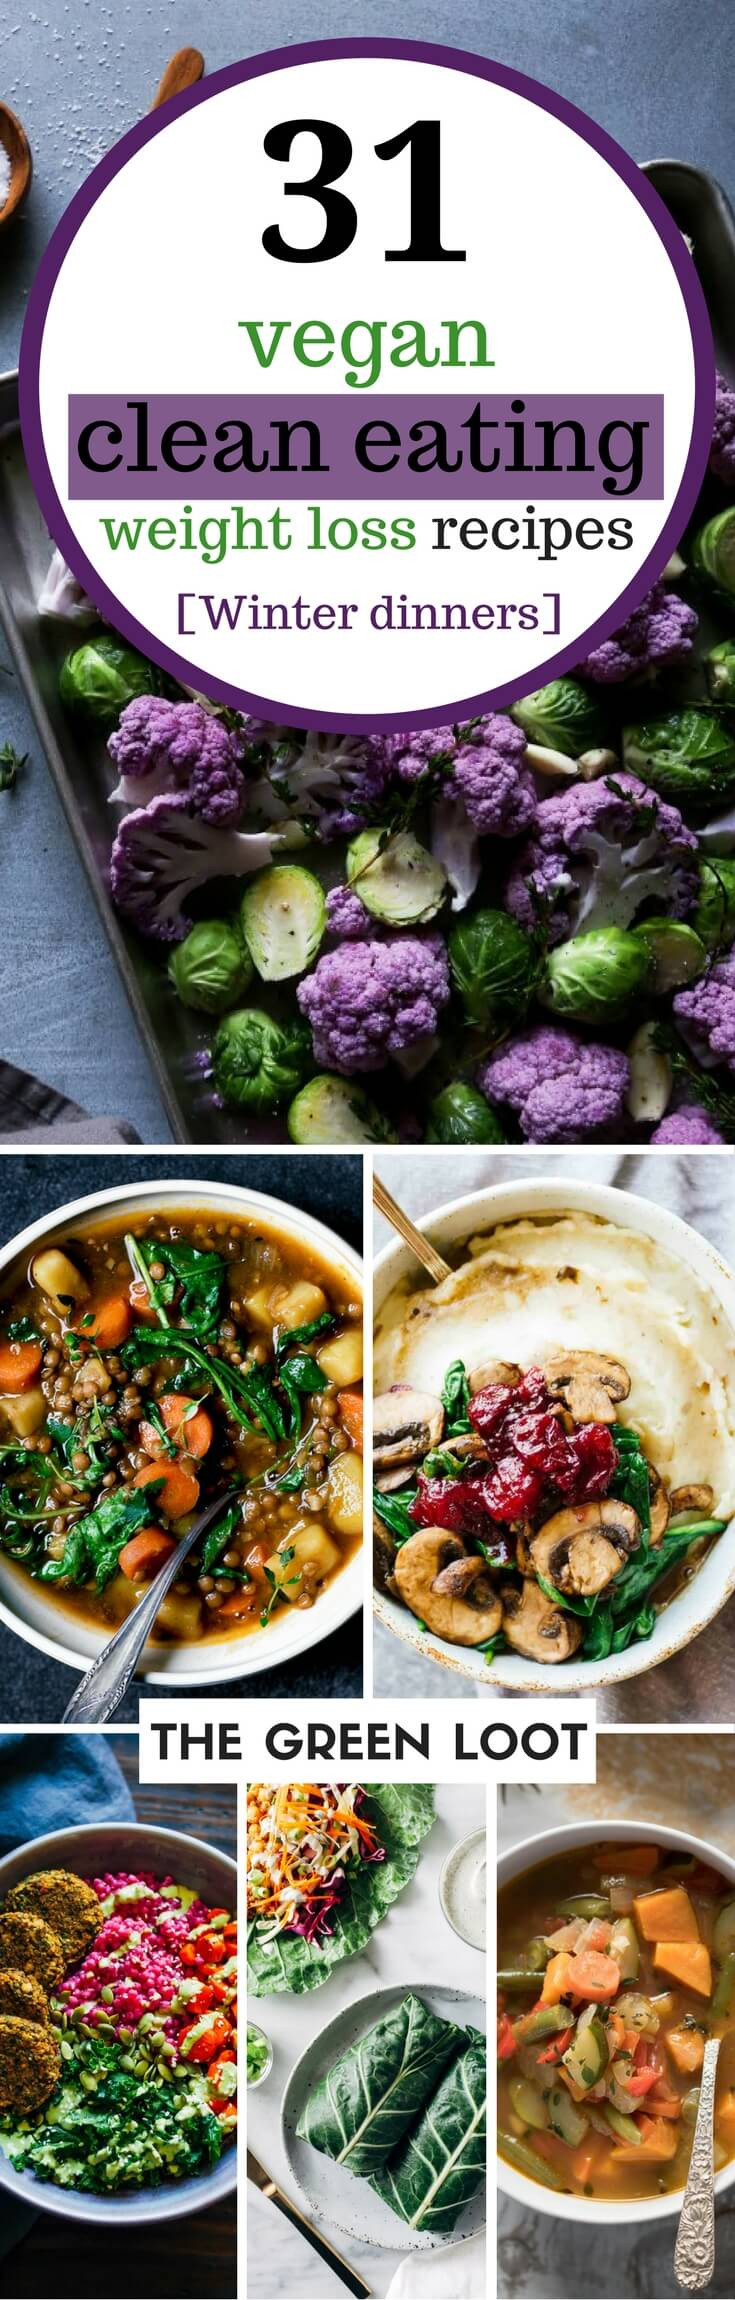 24 Of the Best Ideas for Clean Eating Vegetarian Recipes – Home, Family